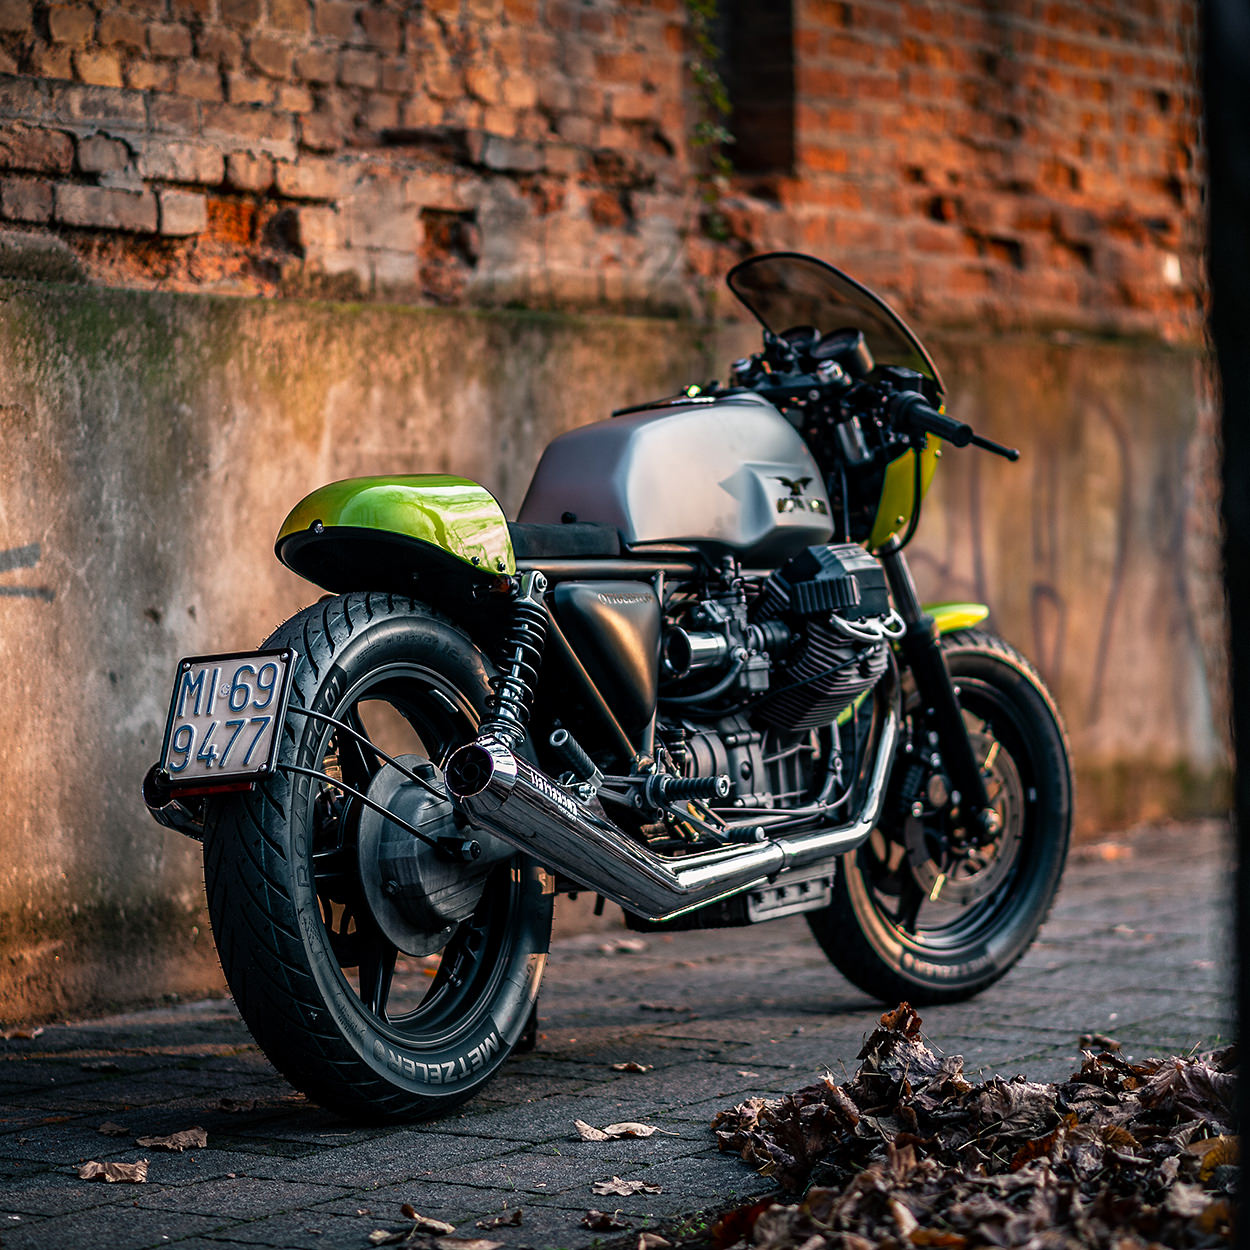 Moto Guzzi 850 T5 by Remastered Cycle